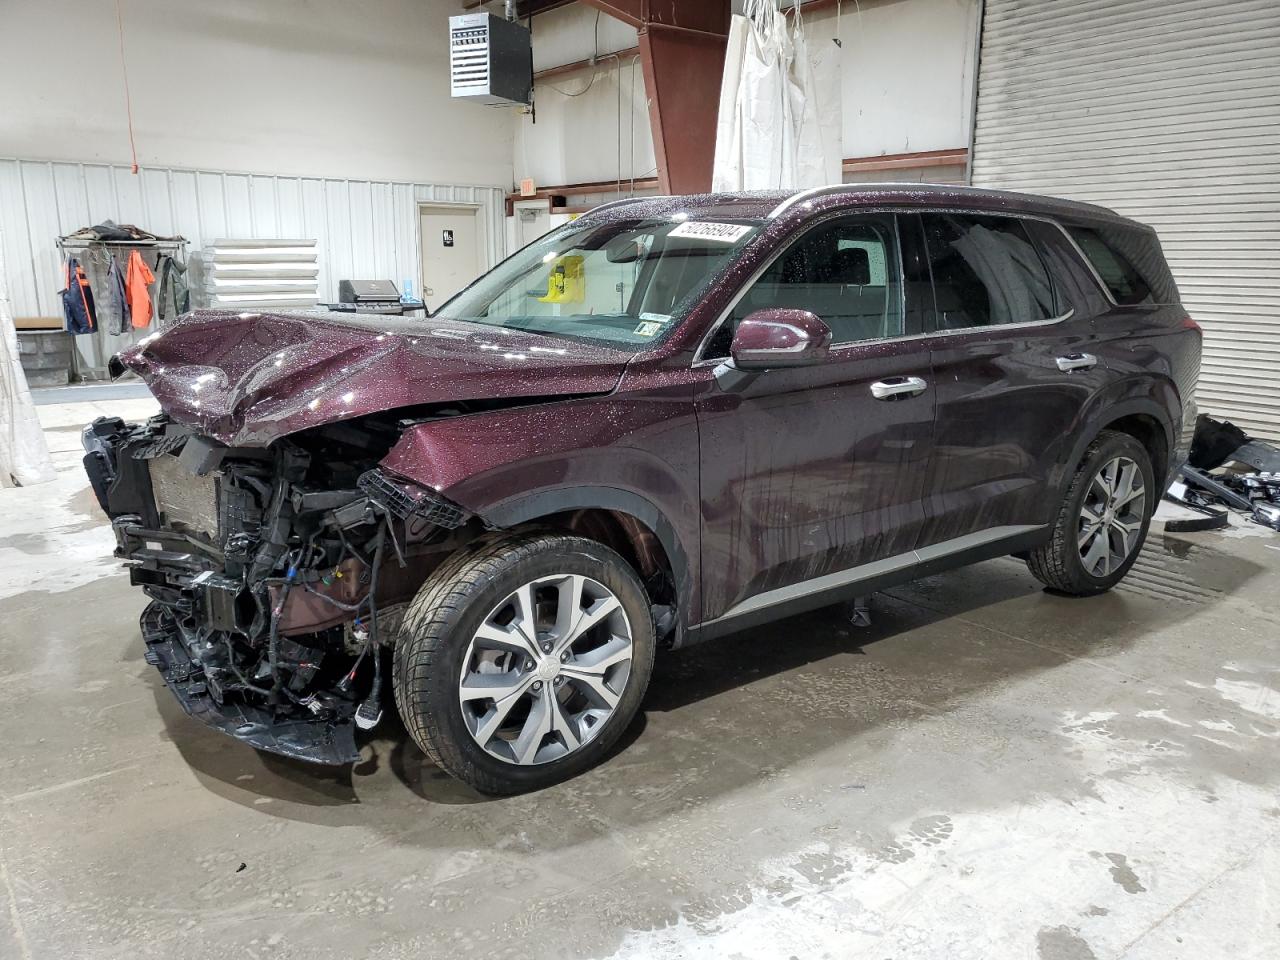 vin: KM8R4DHE5NU482852 KM8R4DHE5NU482852 2022 hyundai palisade 3800 for Sale in 14482 1366, Ny - Rochester, Leroy, New York, USA